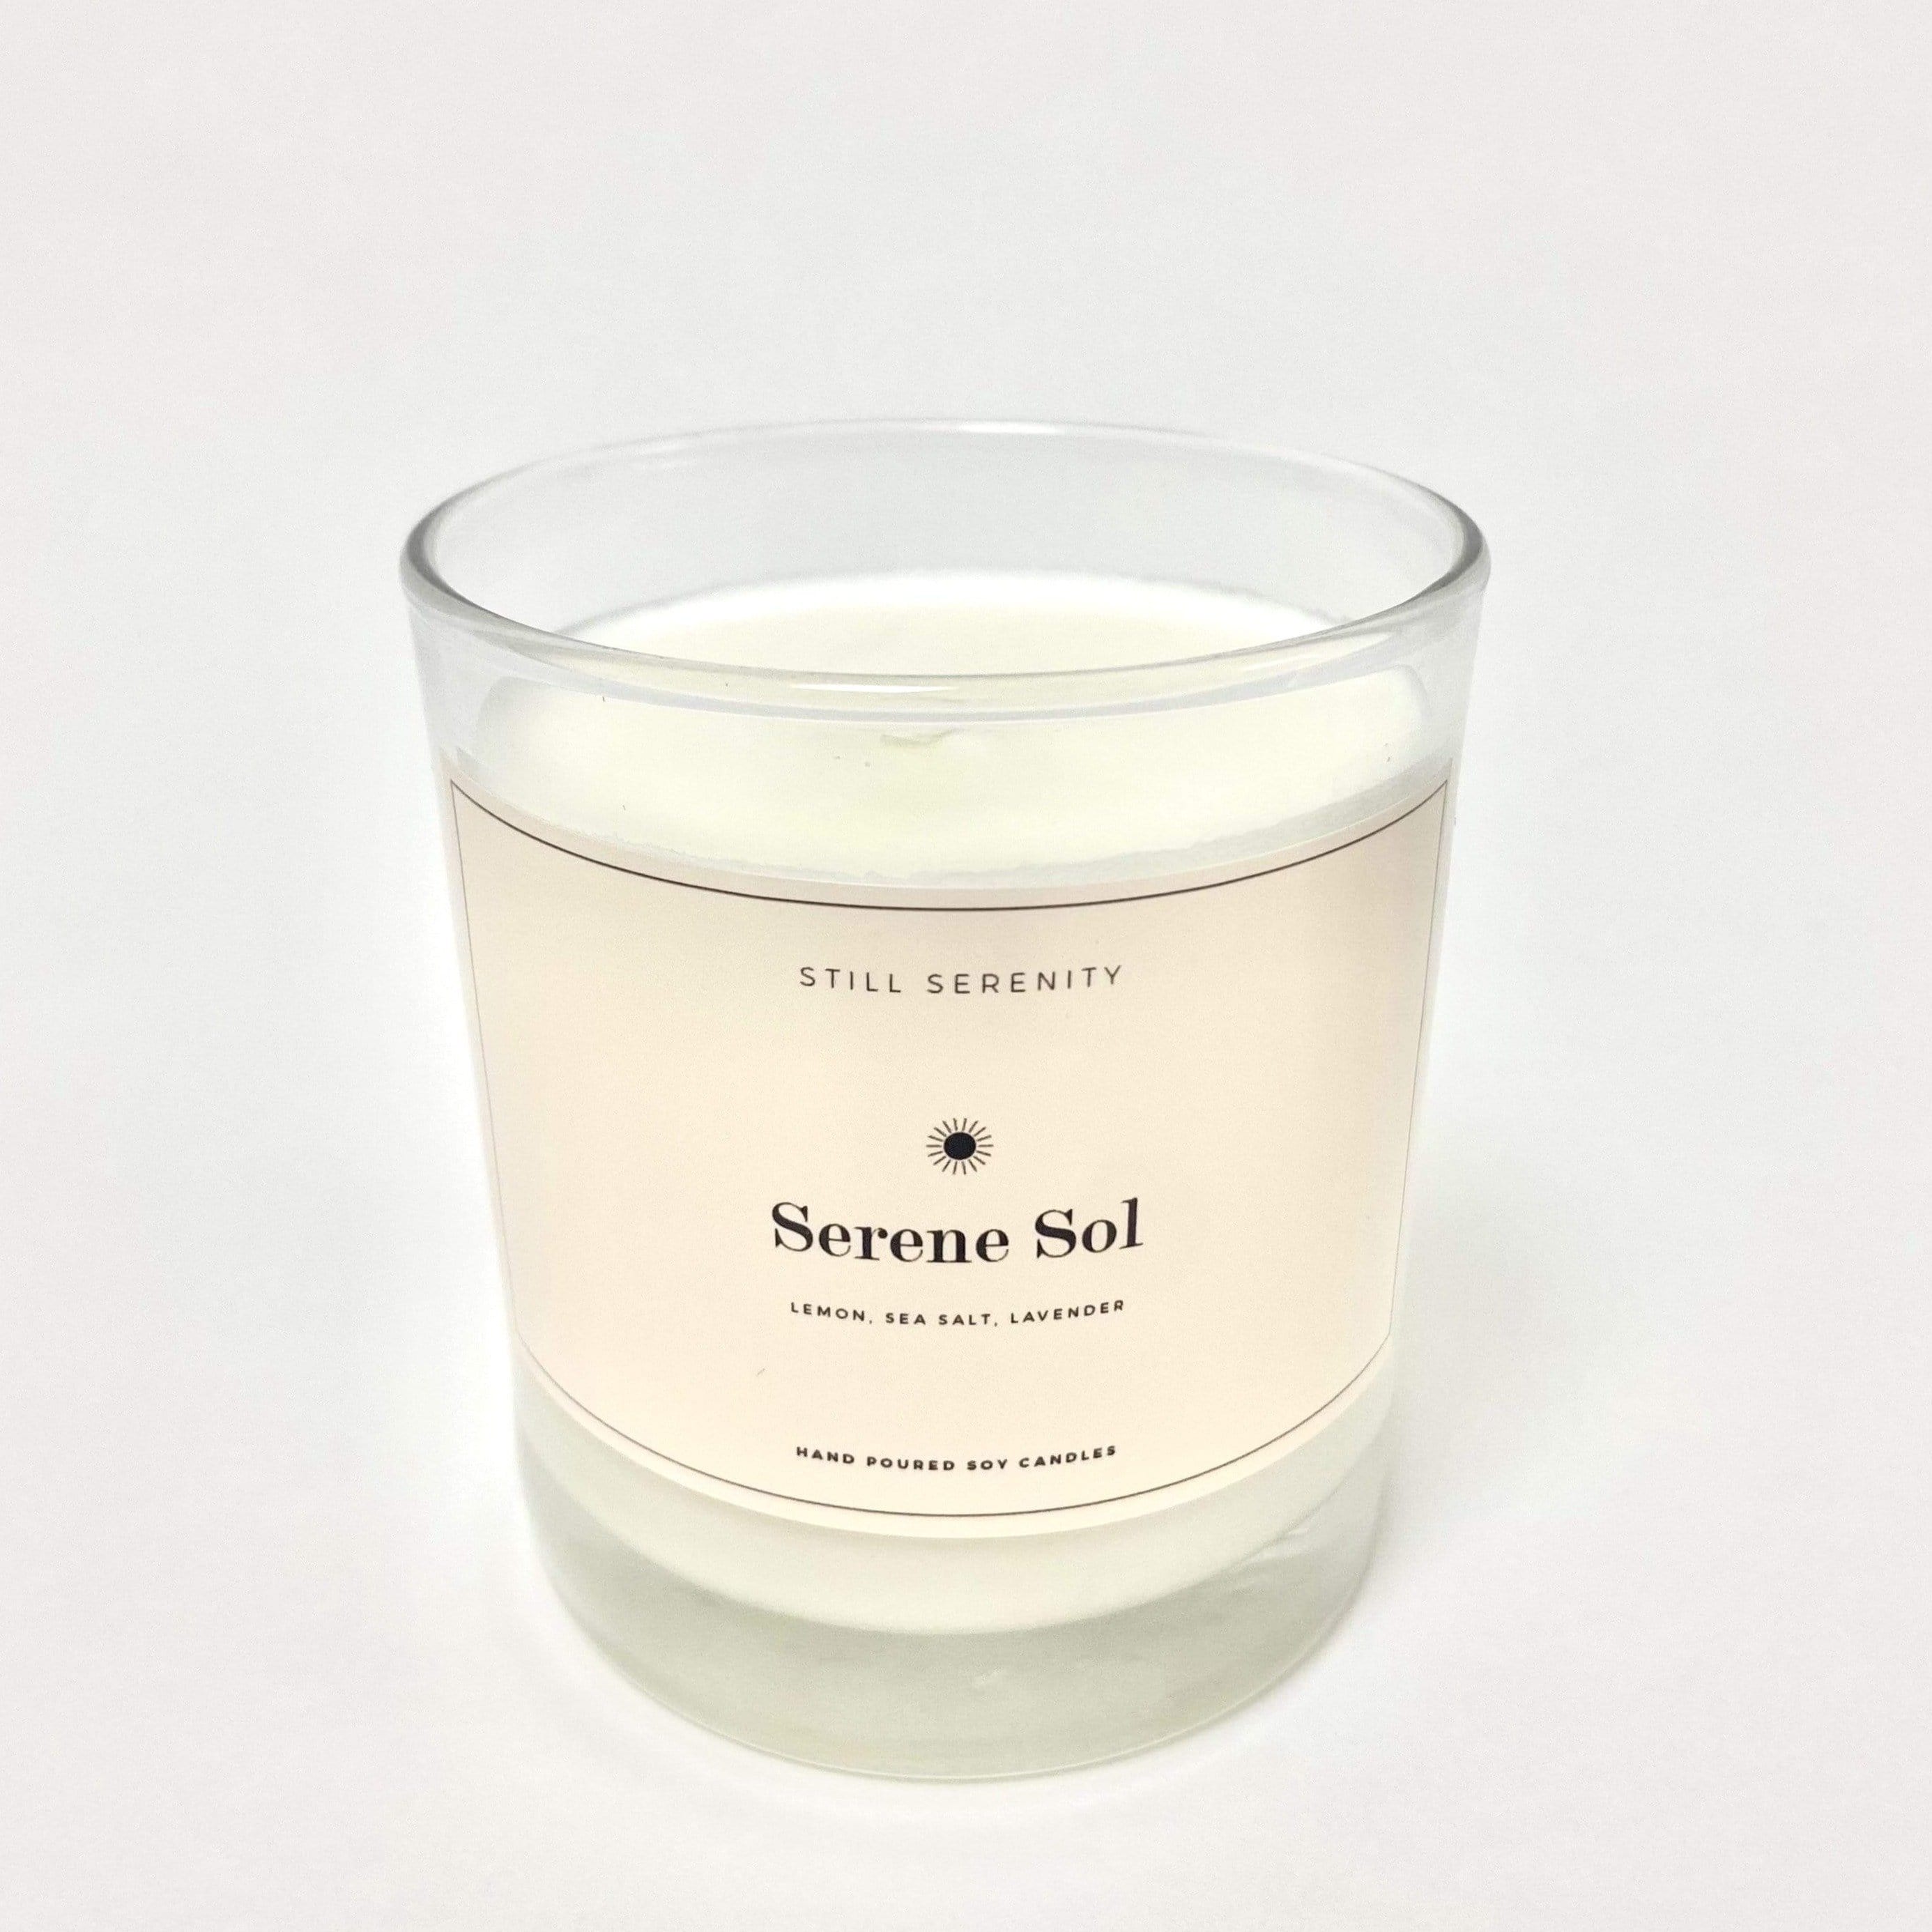 Serene Sol Soy Candle